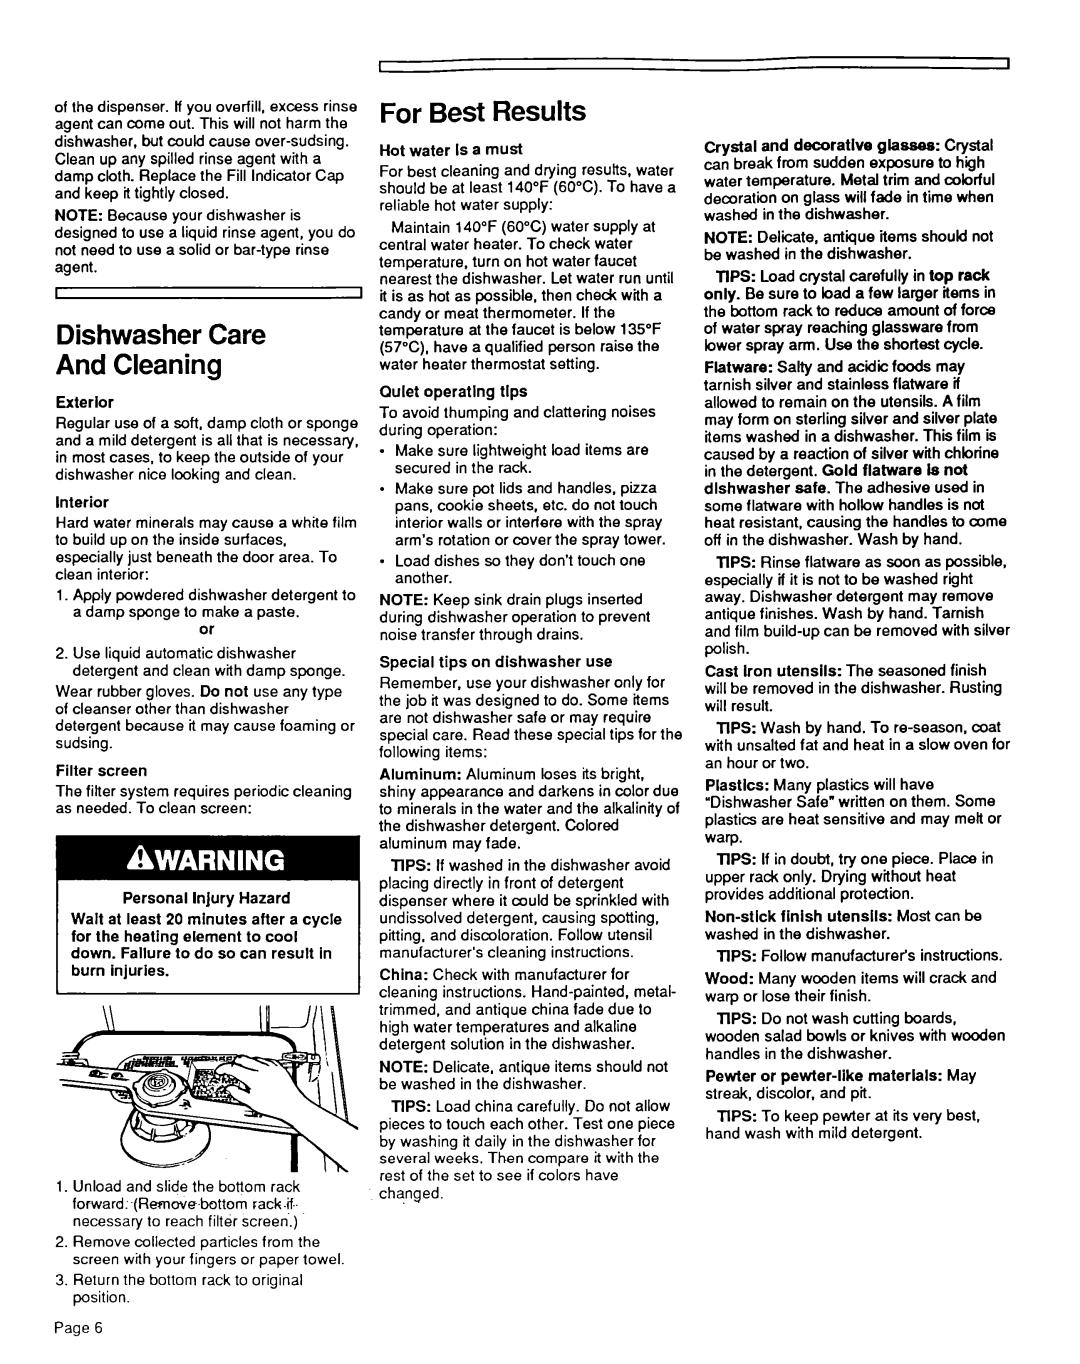 Estate TUD3OOOW installation instructions Dishwasher Care And Cleaning, For Best Results 